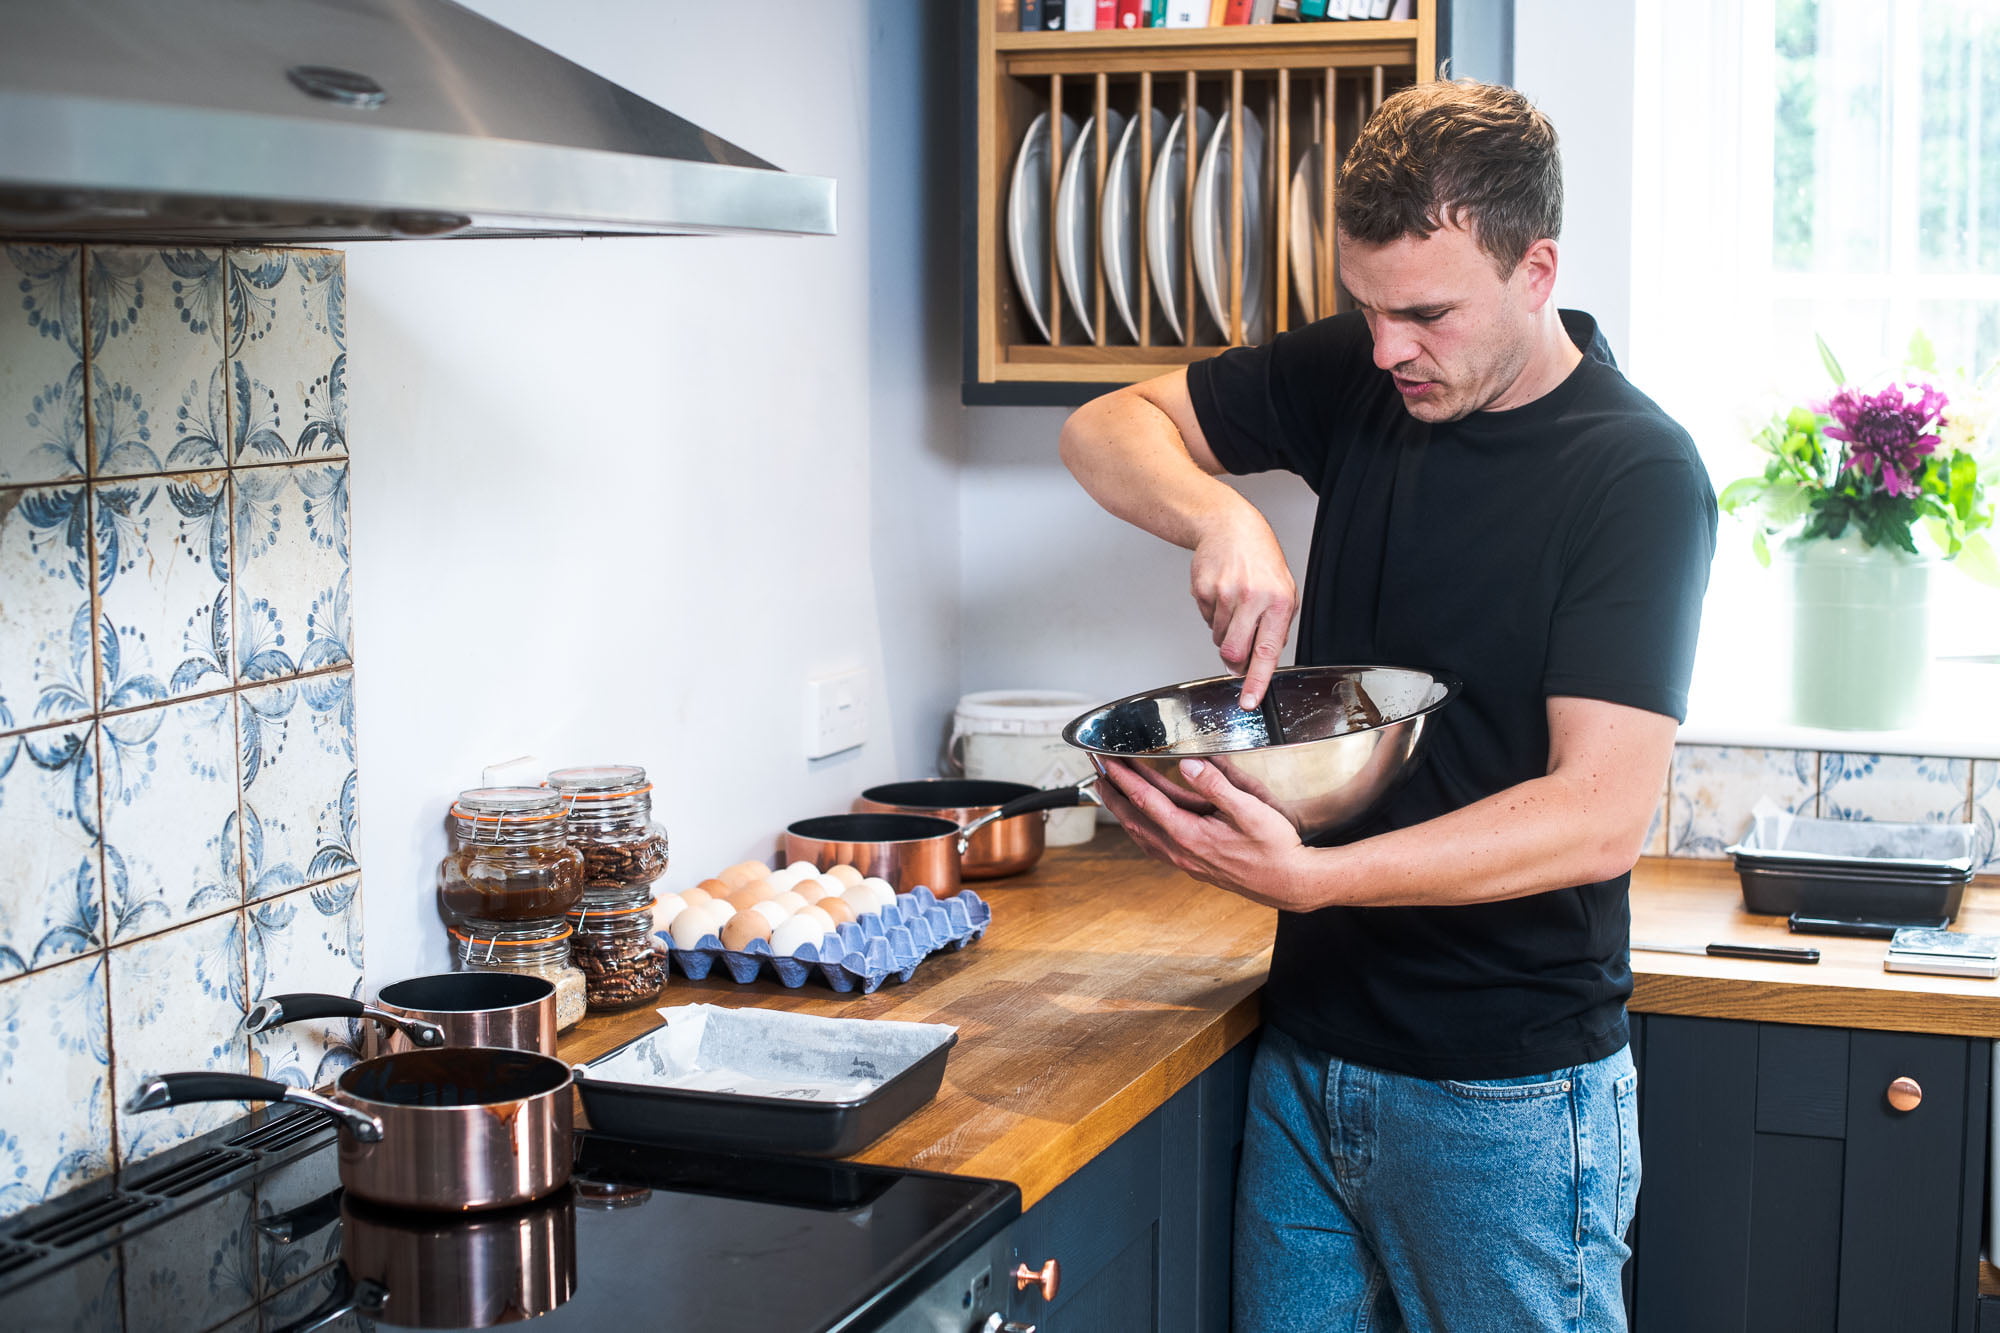 Luke (Brownie and the Bean co-founder) has a mixing bowl in his hands. Inside the mixing bowl is chocolate. He is in a modern style family kitchen with eggs and various other ingredients on the counter.